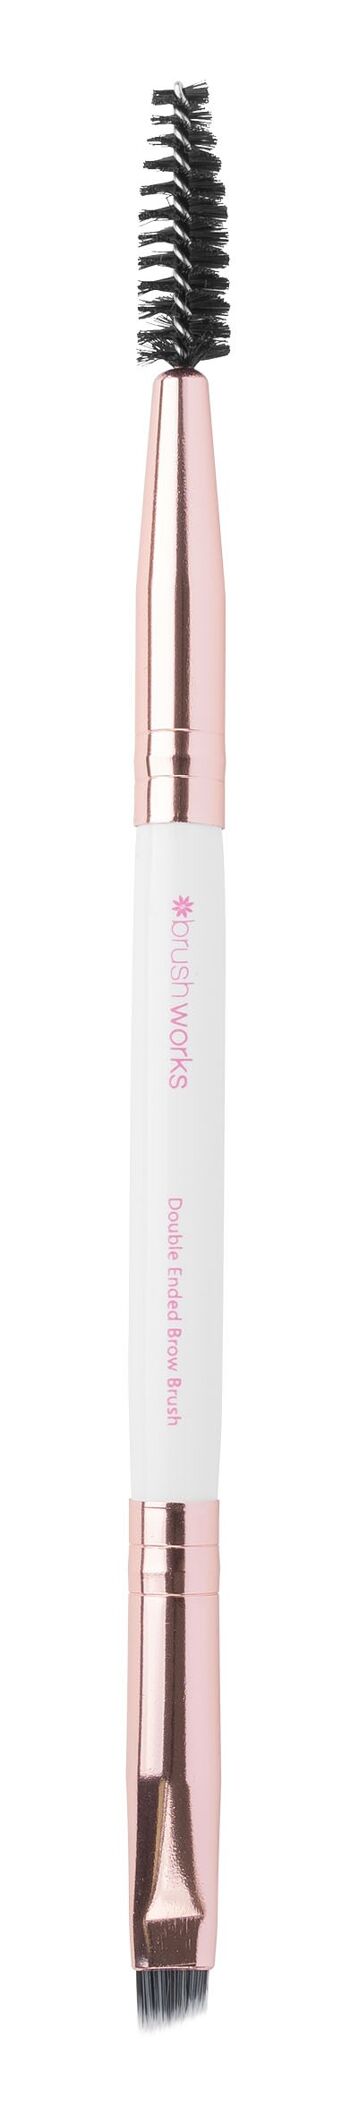 Brushworks Pinceau Duo Sourcils Blanc & Or 5